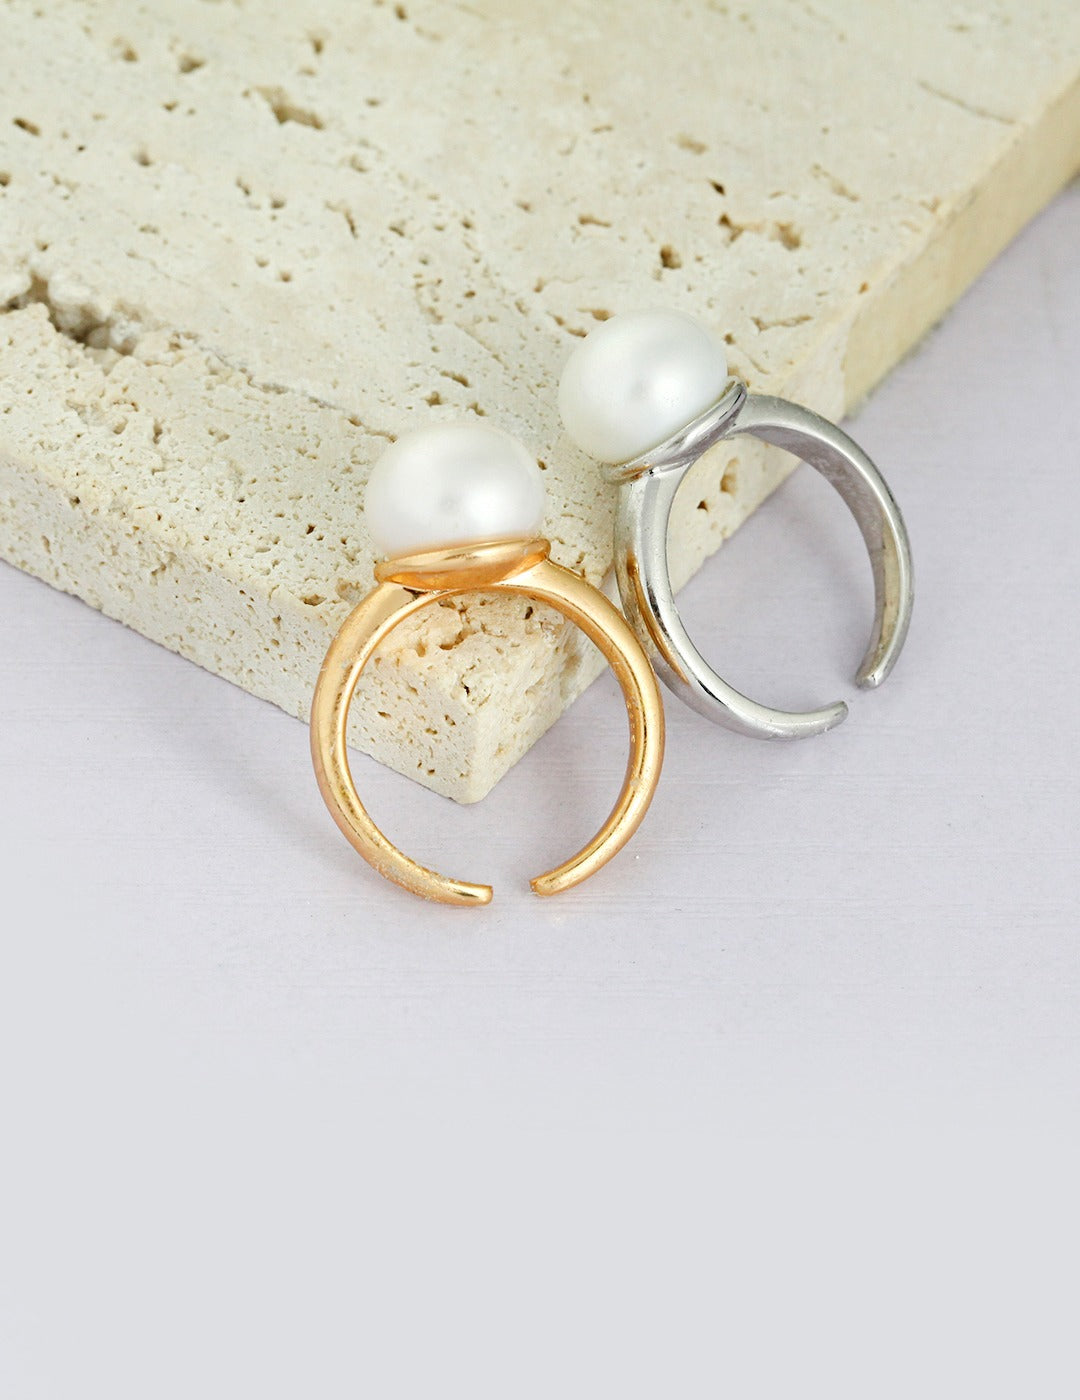 Gumball Pearl Ring in 14K Gold